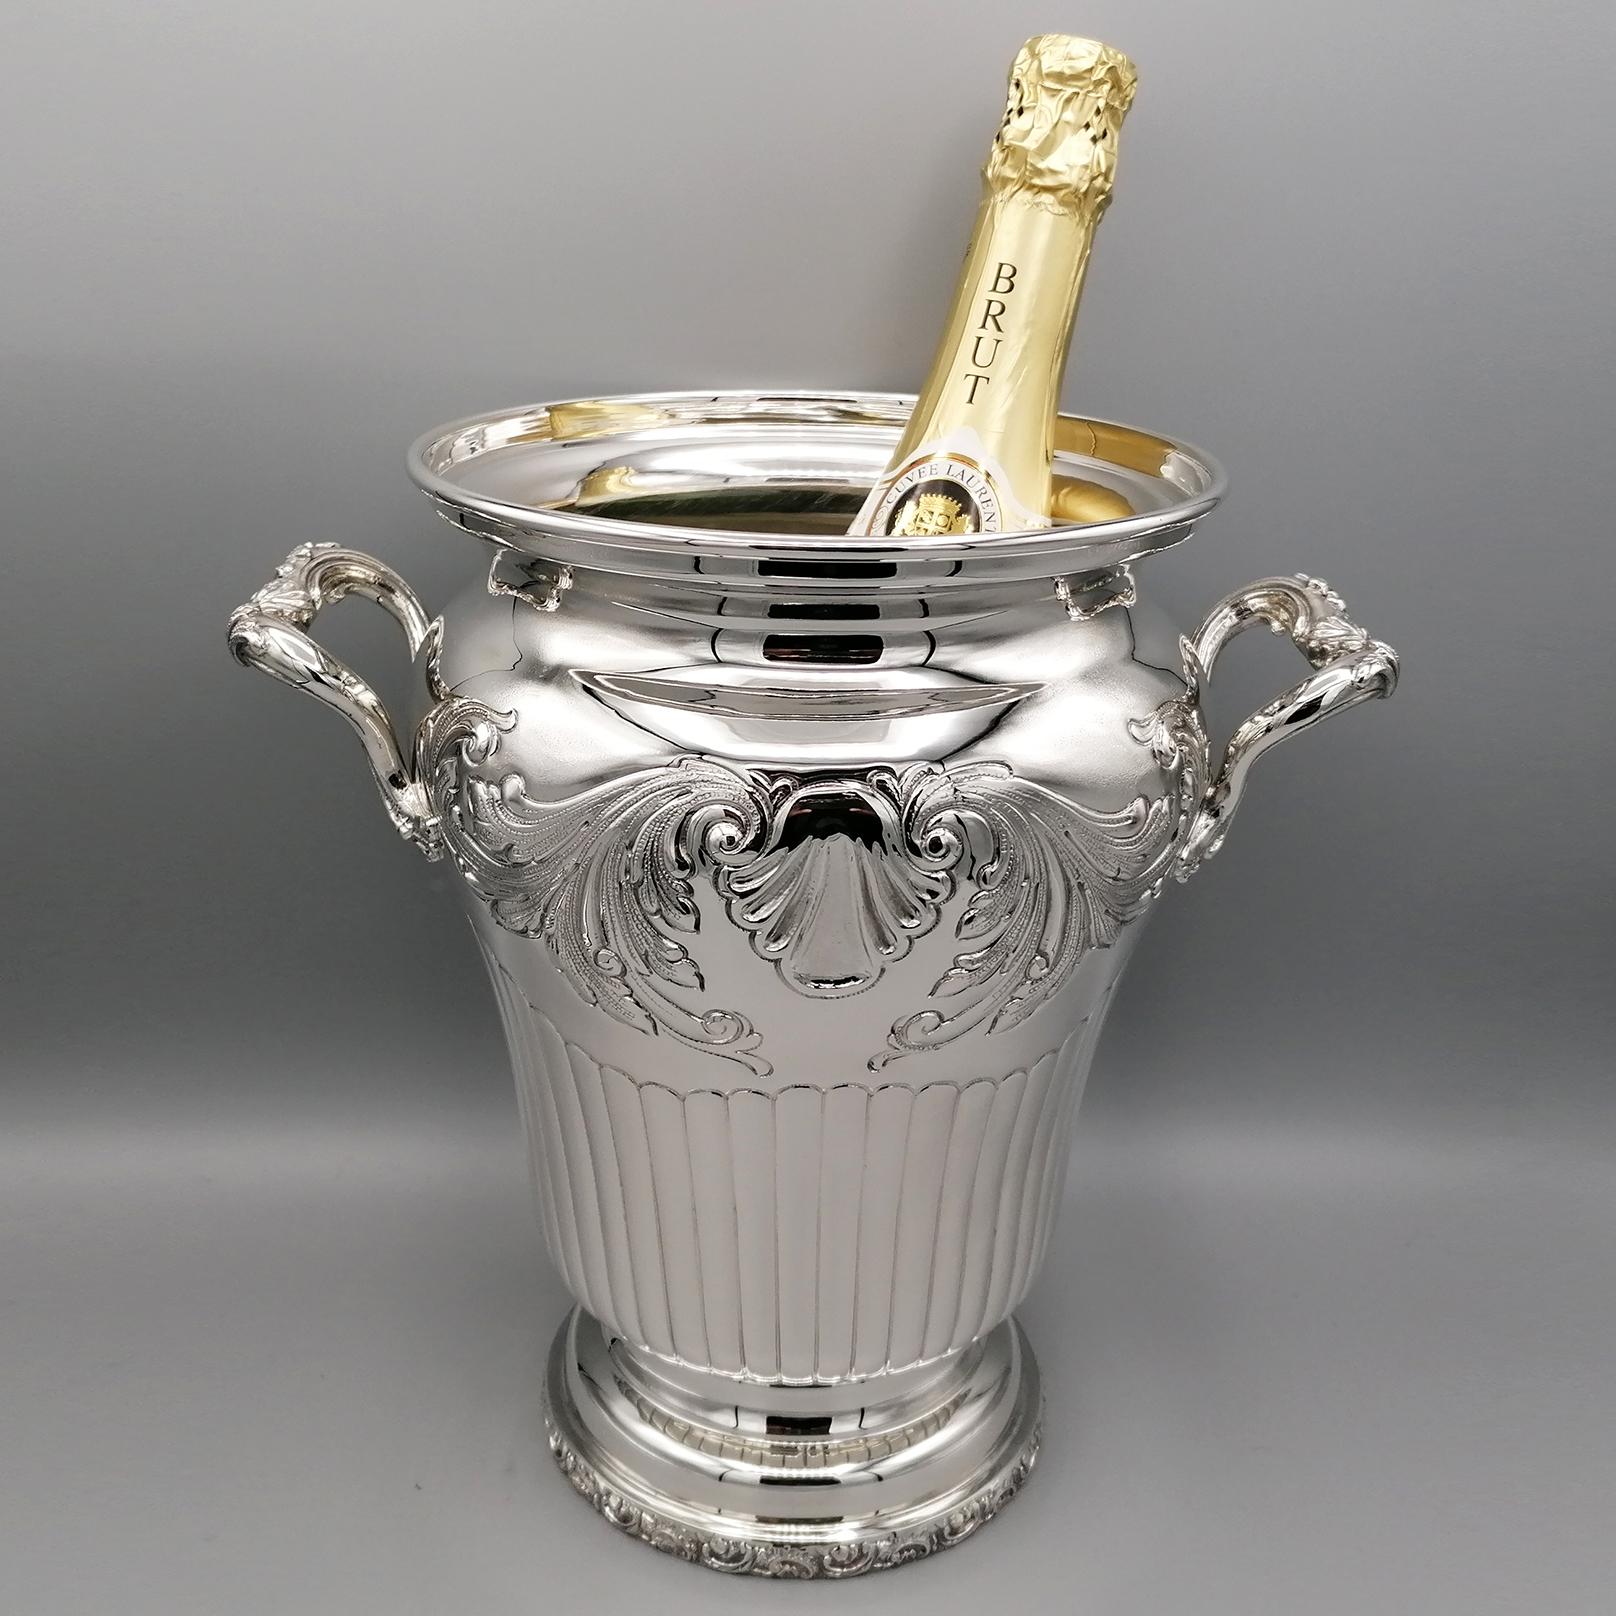 Important Baroque style Champagne bucket made of 800 solid silver.
The body is shaped, chiseled and engraved with volutes and shell typical of the Baroque style. In the lower part a fluted chisel was made
The handles are cast and chiseled.
A baroque